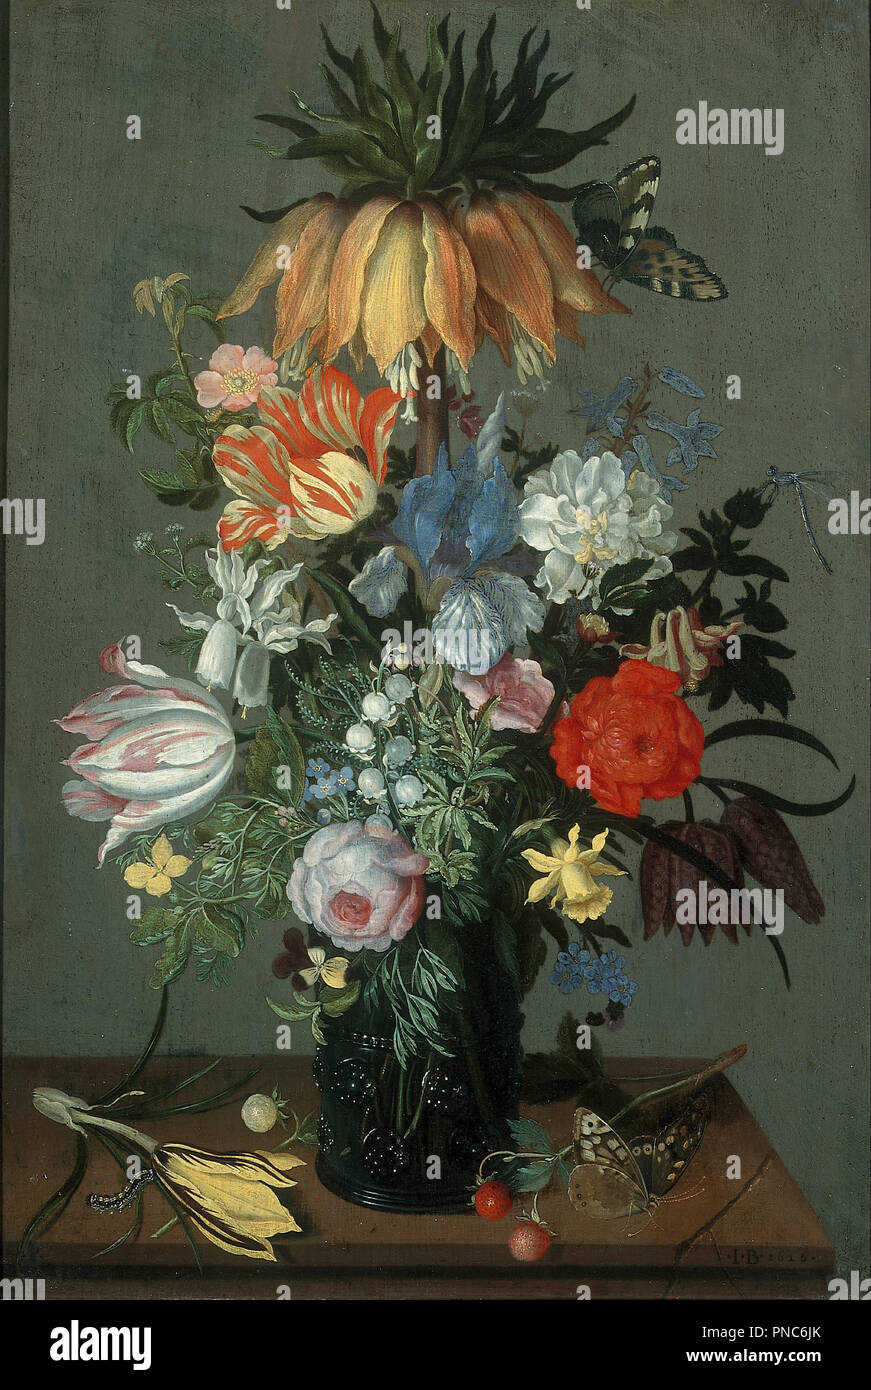 Flower Still Life with Crown Imperial. Date/Period: 1626. Painting. Height: 43 mm (1.69 in); Width: 29 mm (1.14 in). Author: JOHANNES BOSSCHAERT. Stock Photo